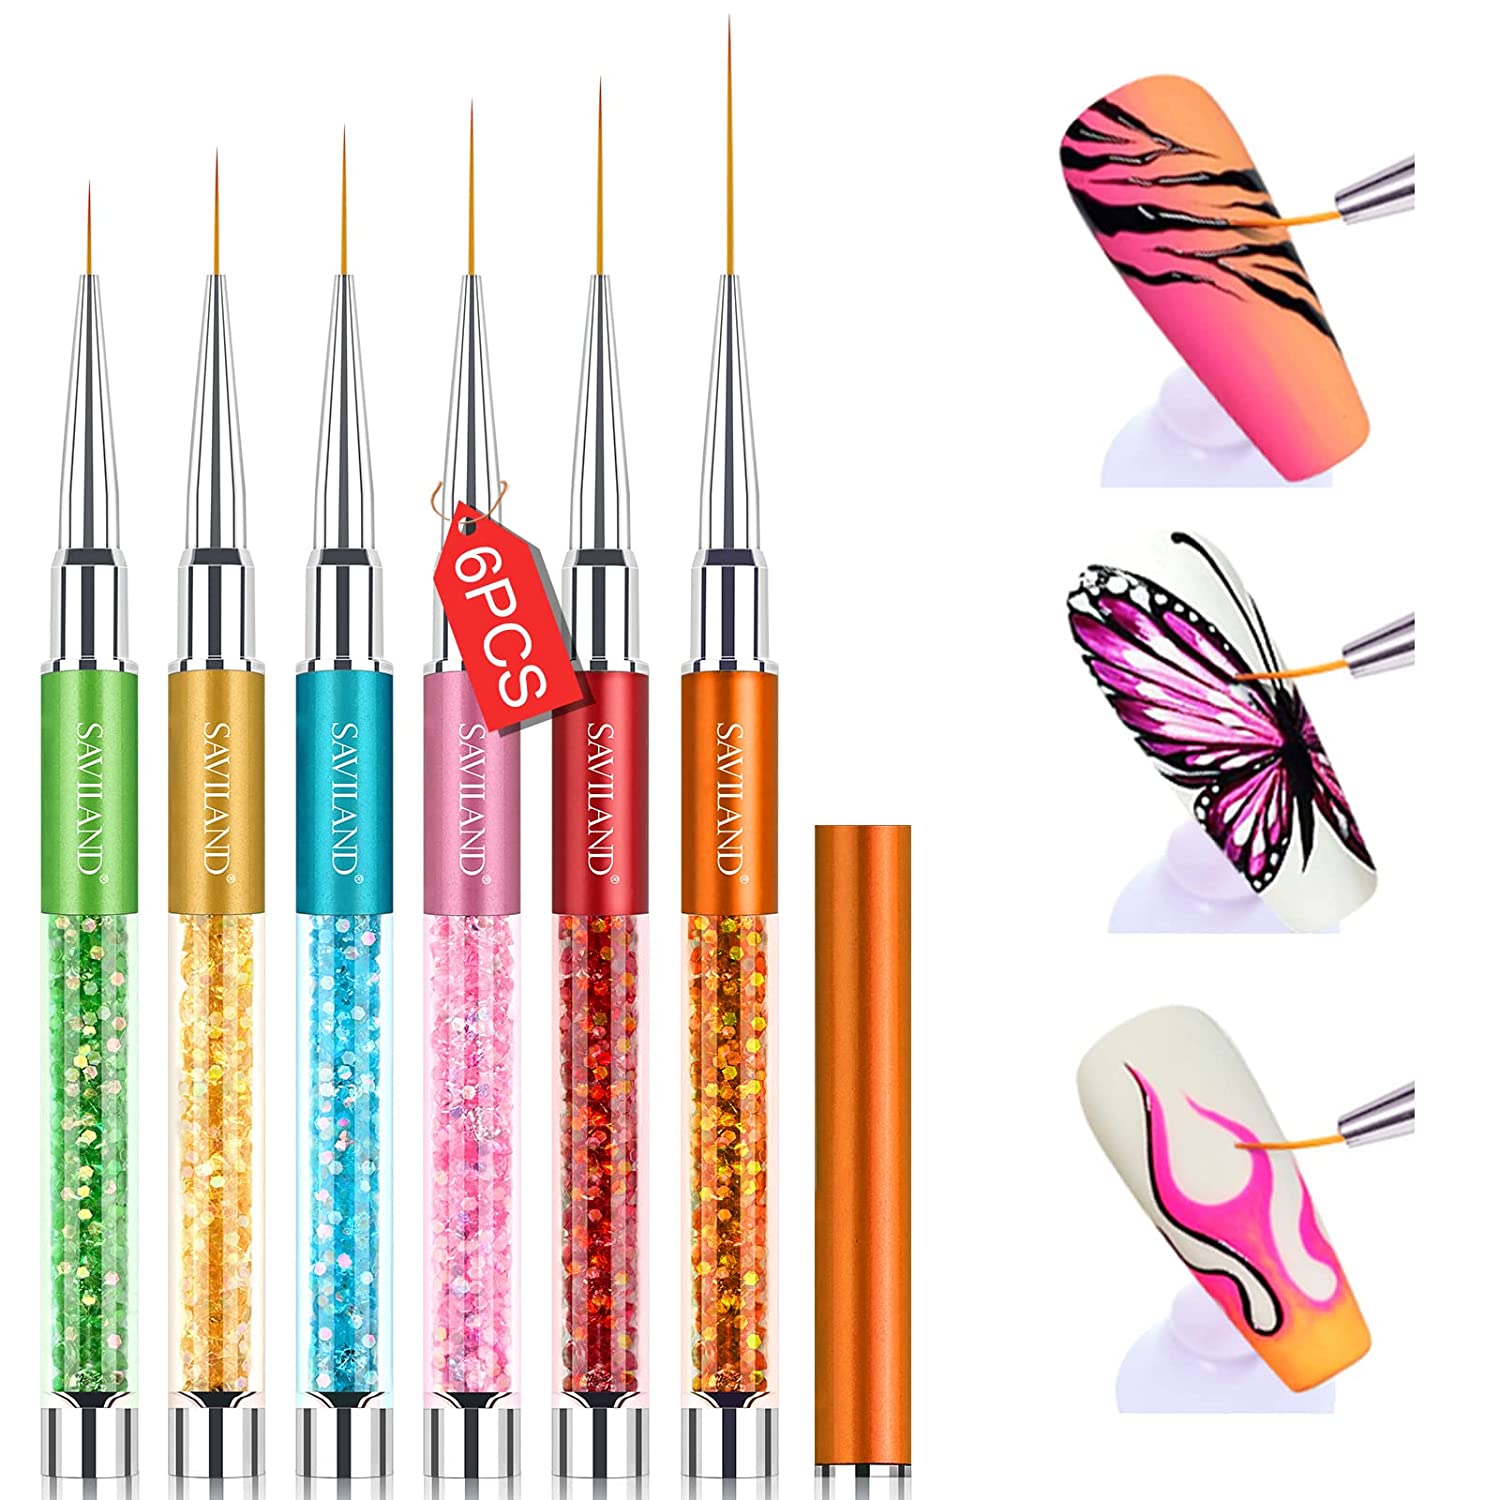 Best nail art kits for girls and women | Business Insider India